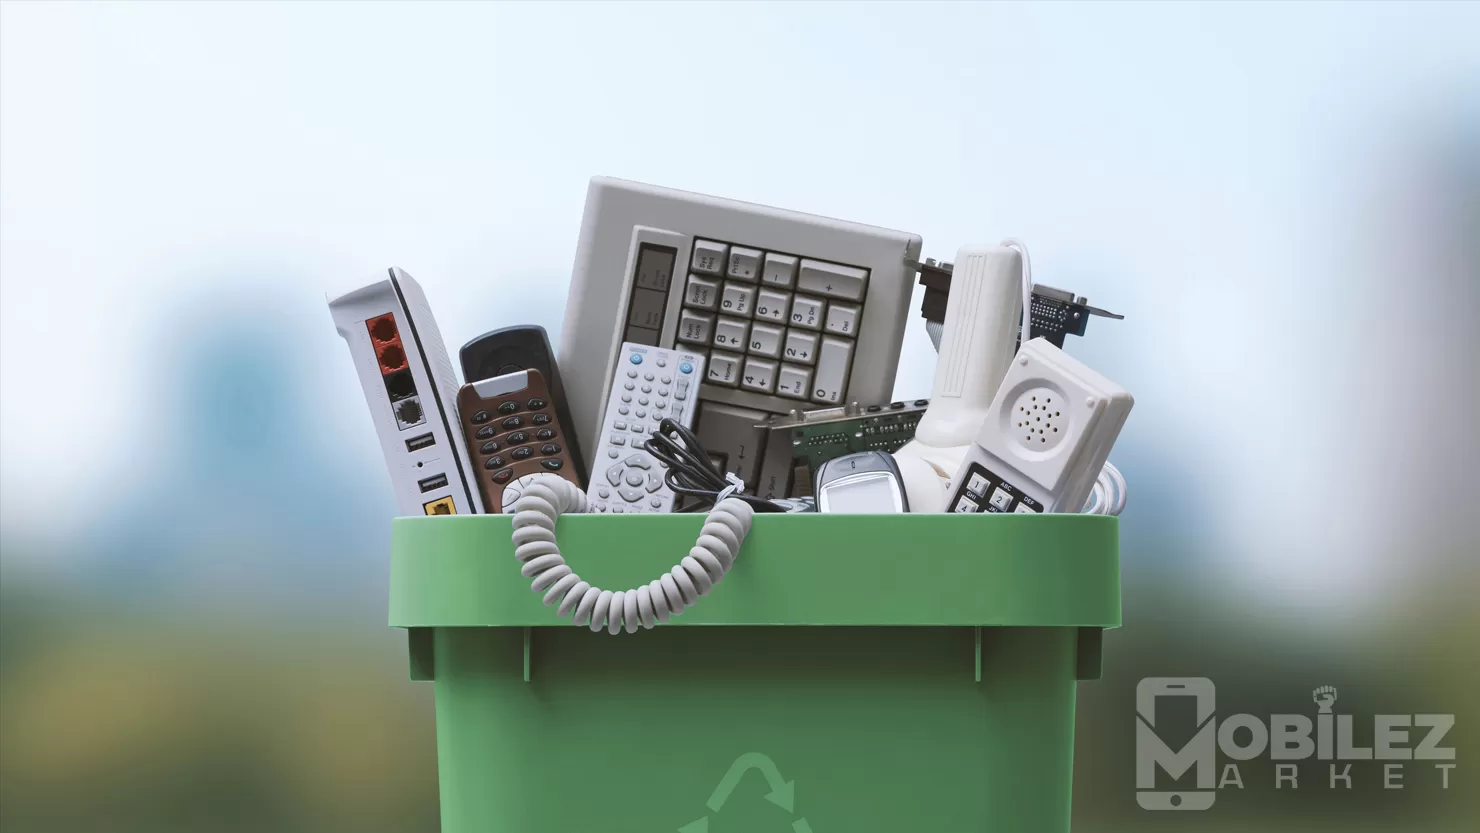 The Environmental Impact of Mobile Phones | E-waste and Sustainability